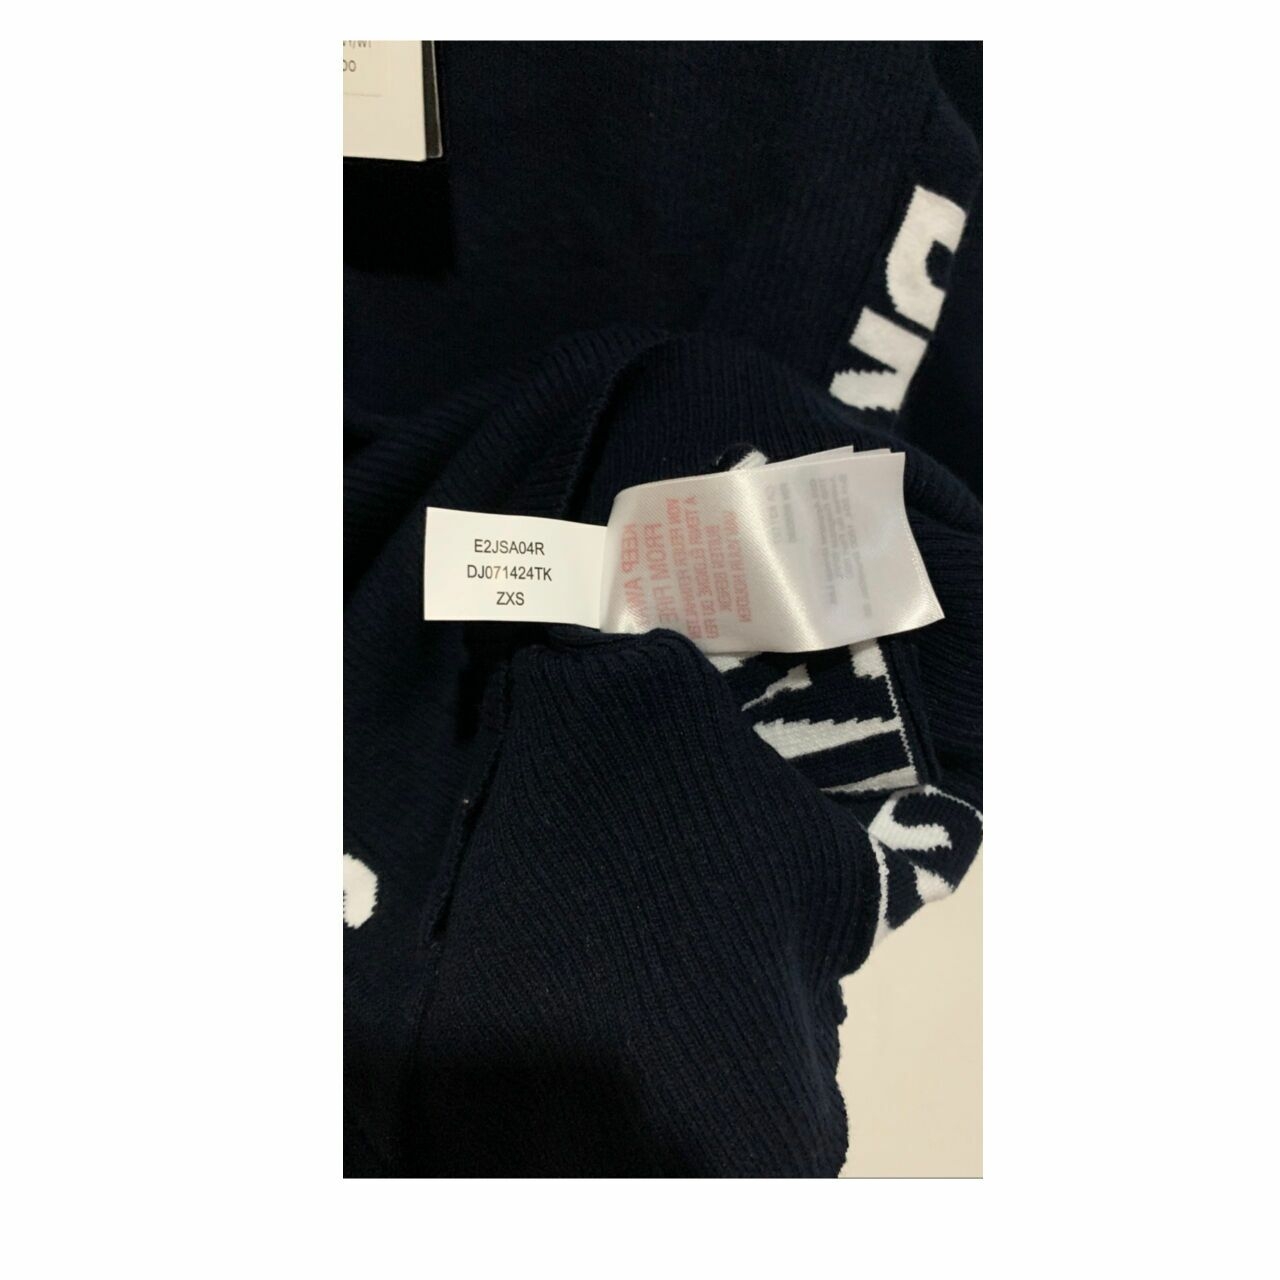 Dkny Jeans Puff Sleeve Sweater